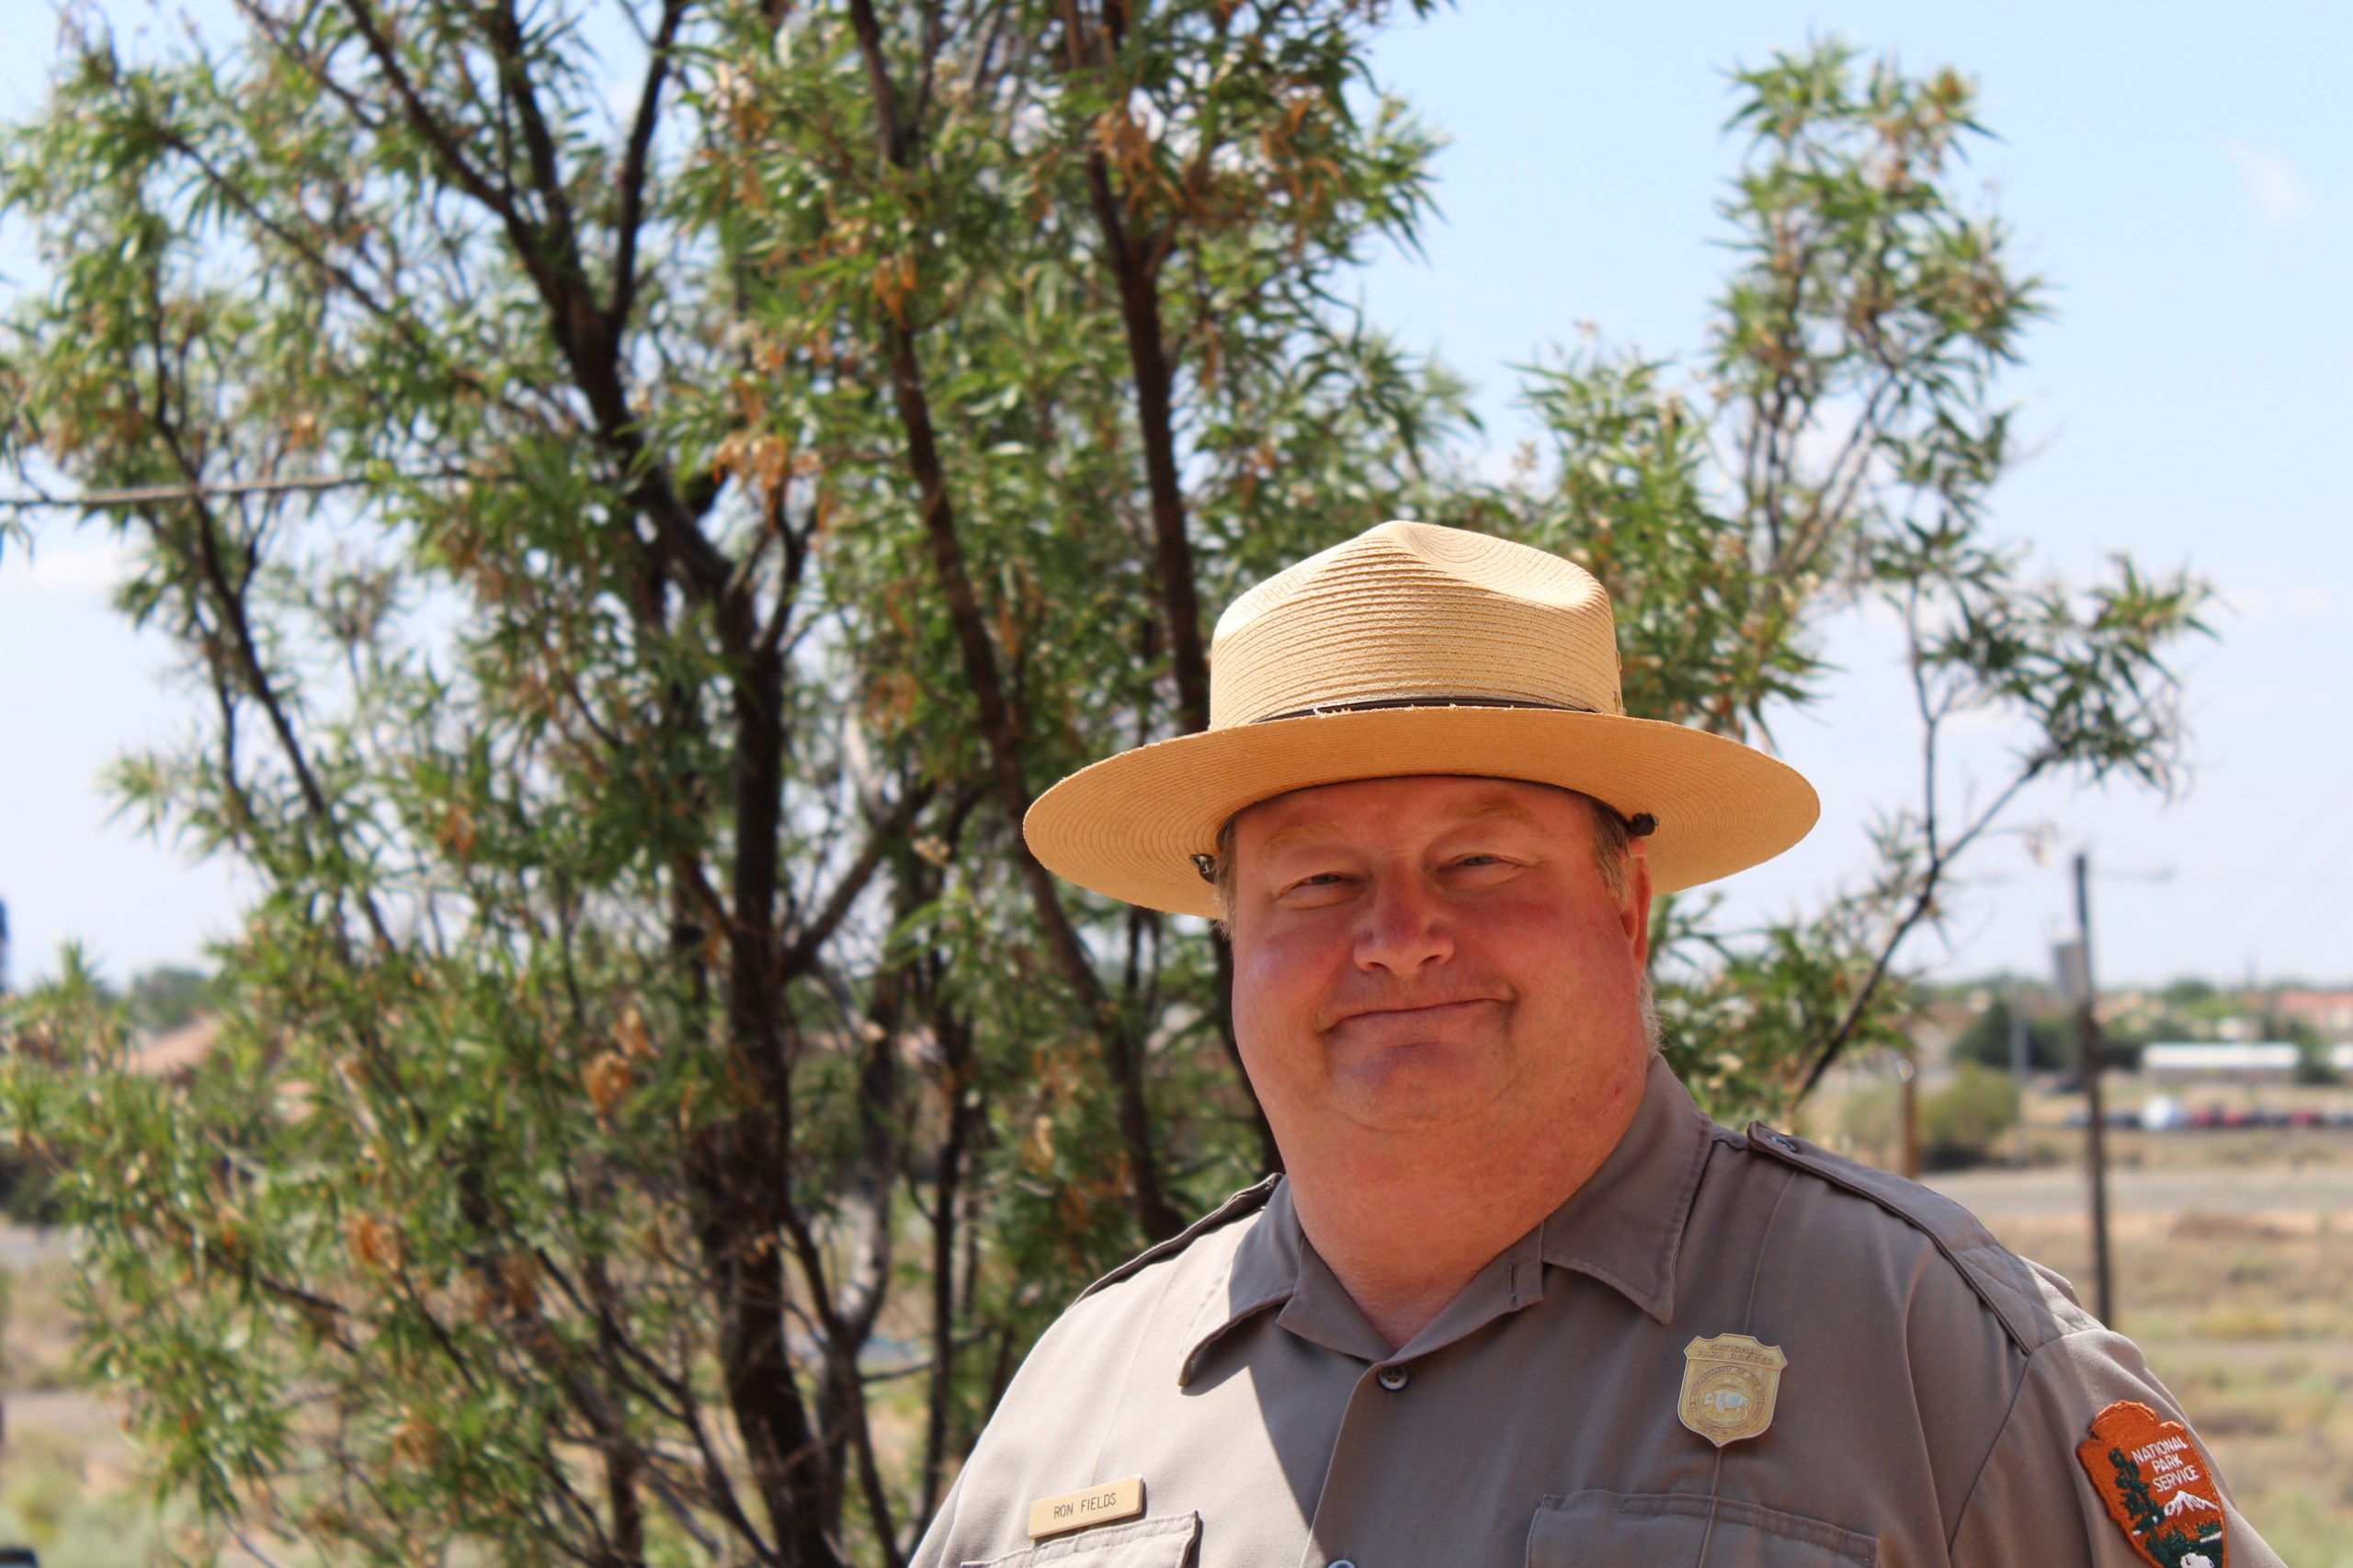 Man in uniform and a hat stand standing in front of a tree.